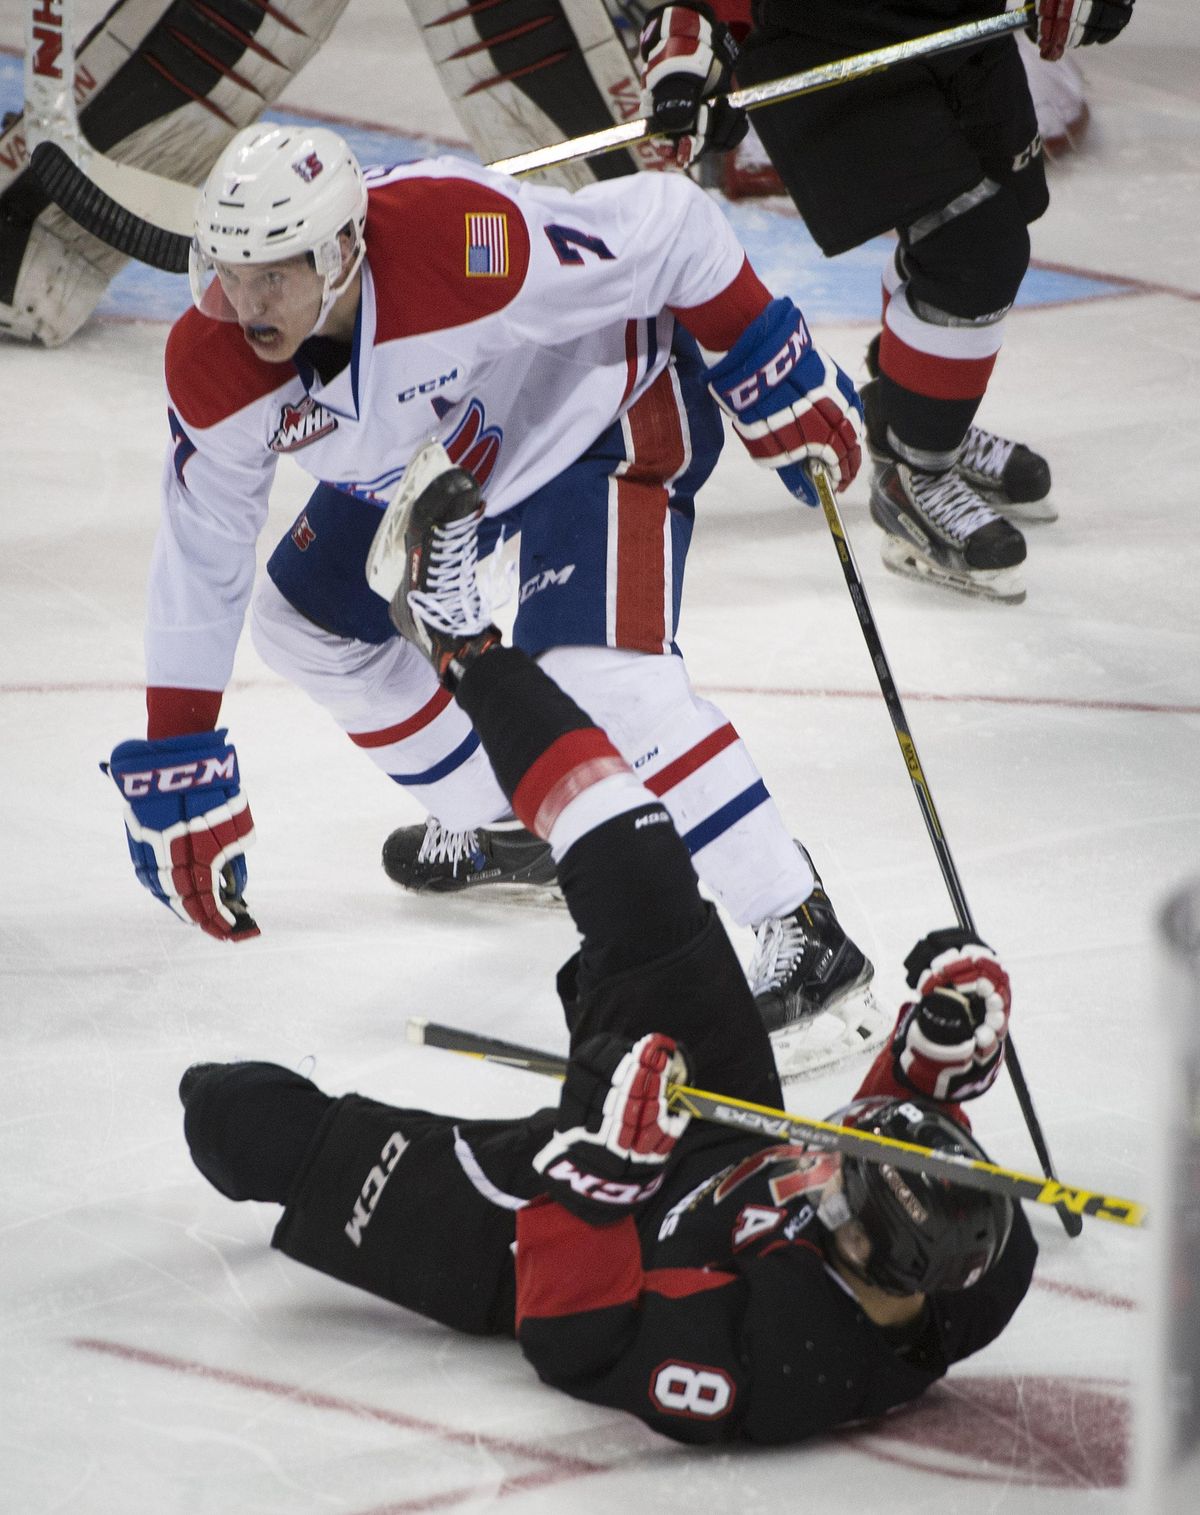 Spokane Chiefs defenseman Evan Fiala, left, knocks Prince George left wing Chase Witala (8) down during the first period. The Chiefs lost 6-0. (Colin Mulvany / The Spokesman-Review)